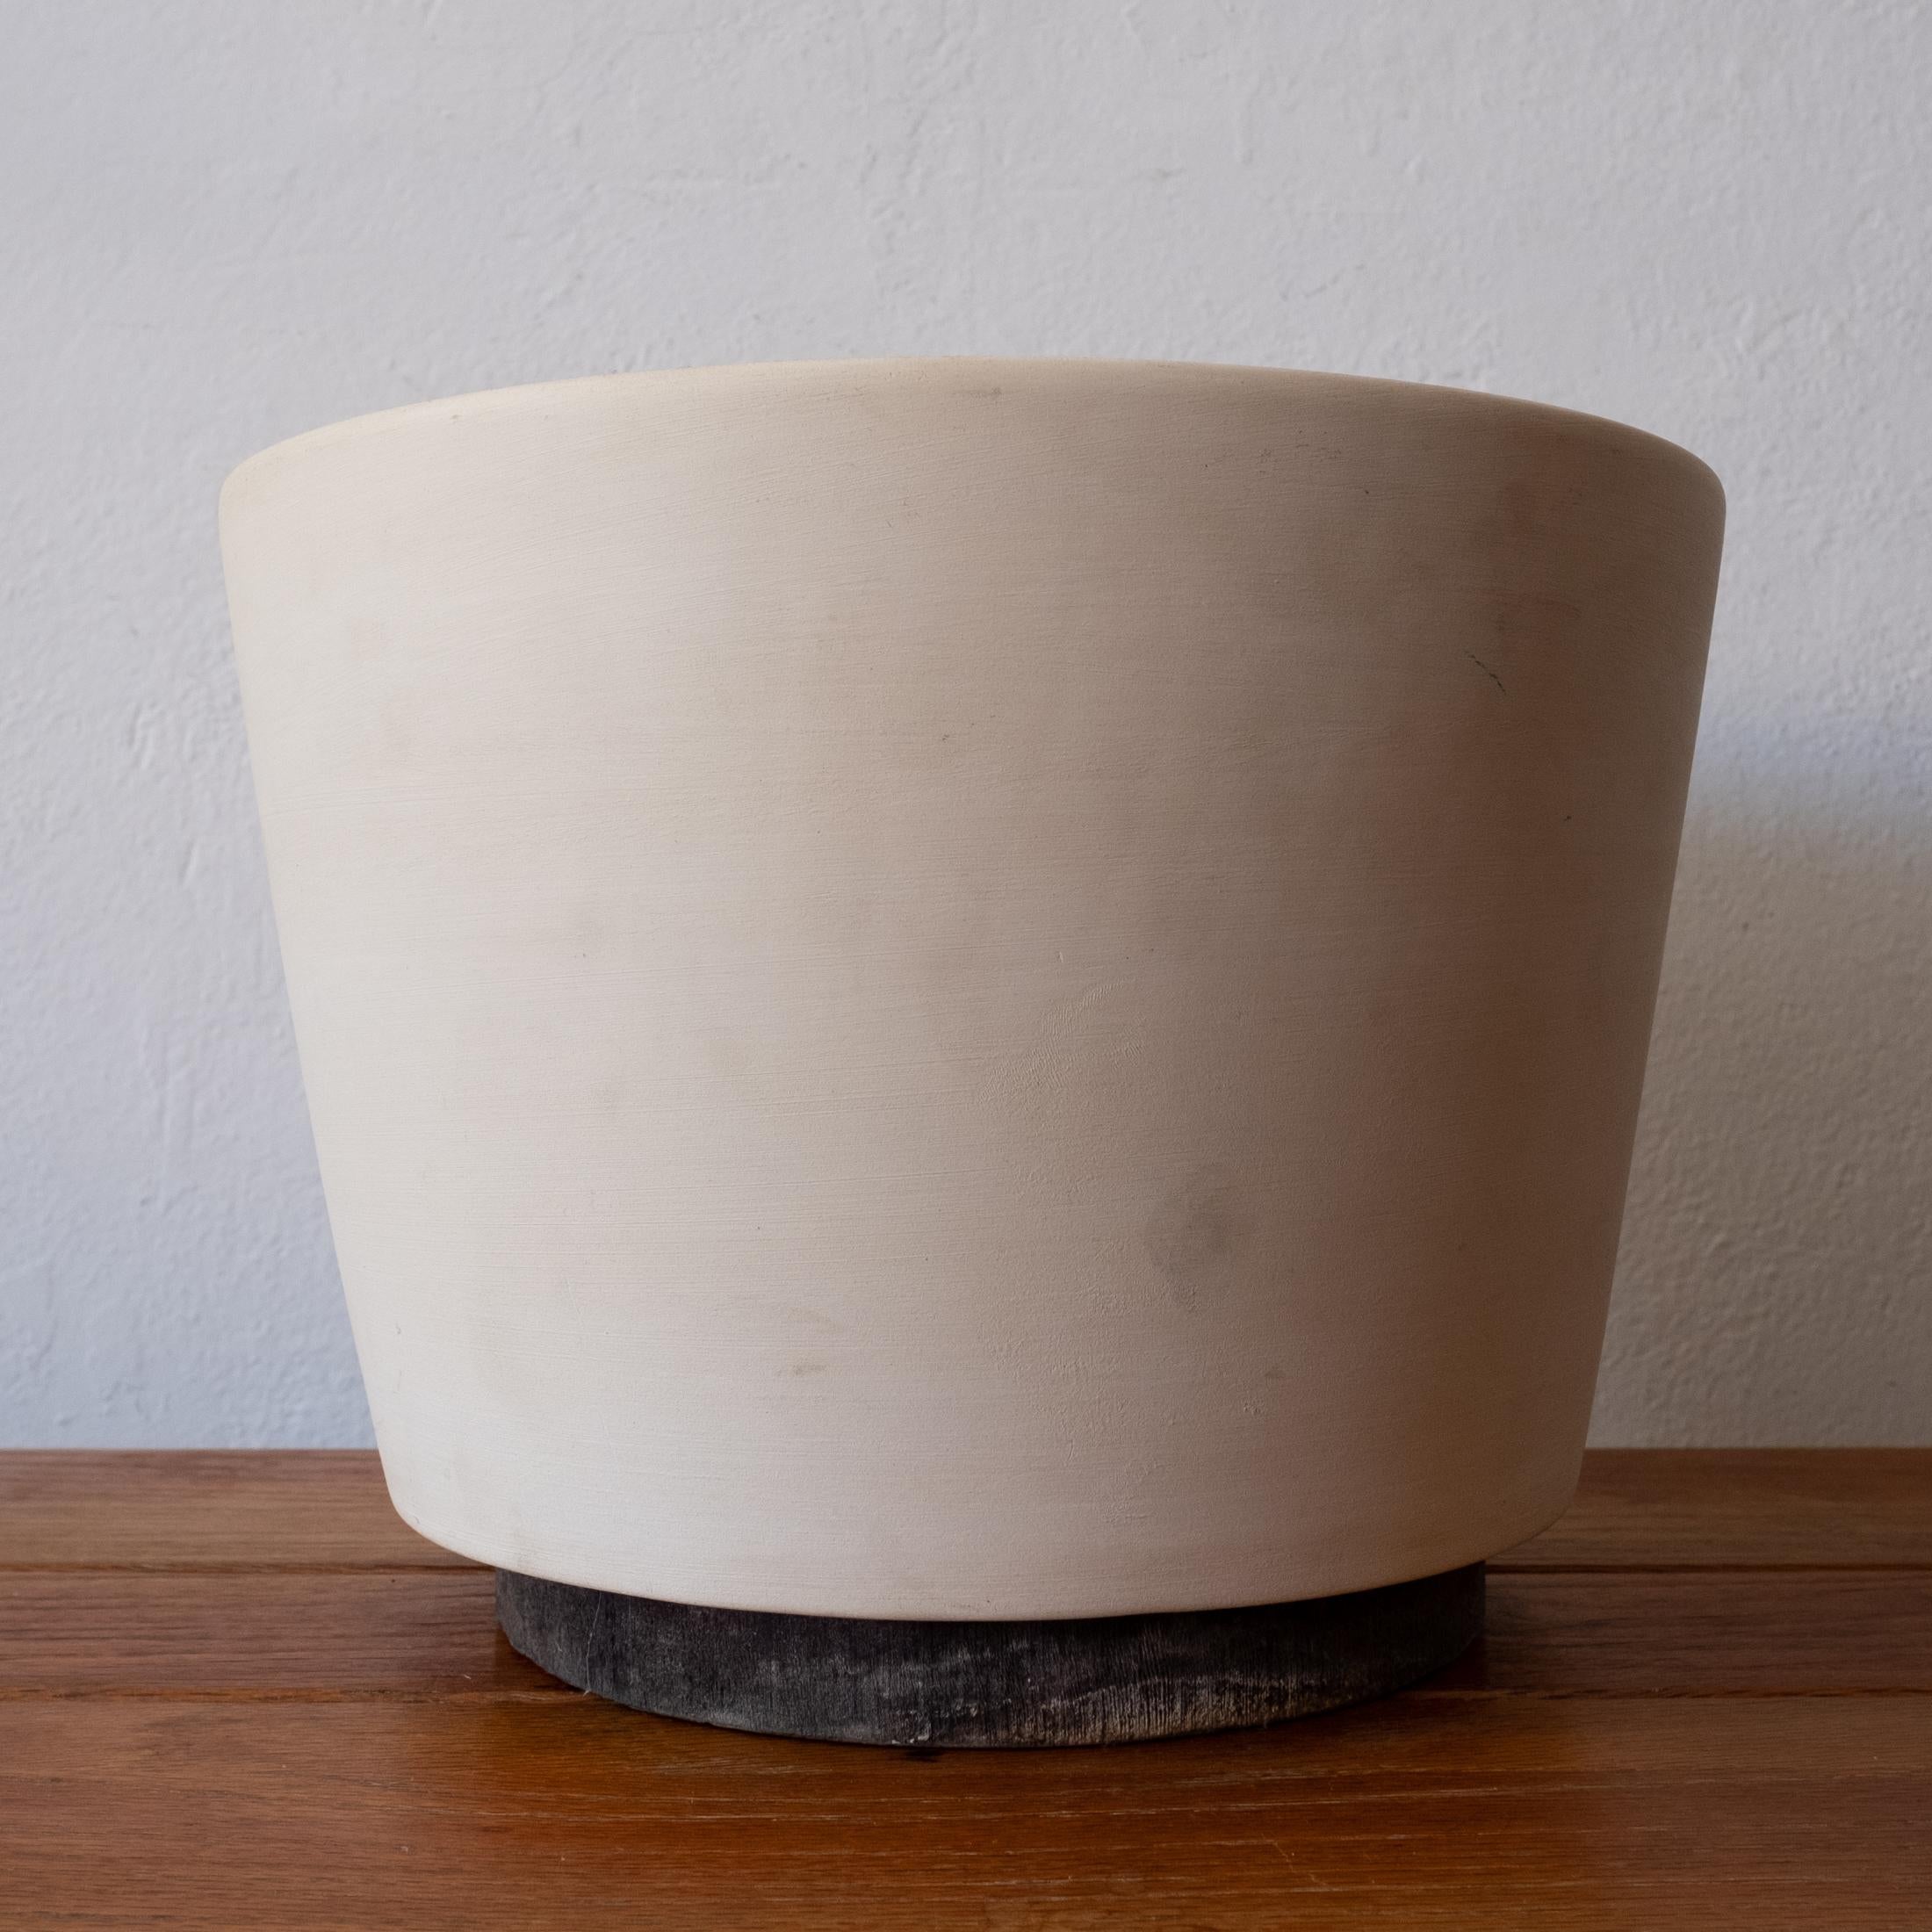 Architectural Pottery planter by Malcolm Leland in bisque. Original redwood foot. Not drilled so it would work great indoors or outside. Architectural Pottery is the epitome of California Mid-Century Modern design.